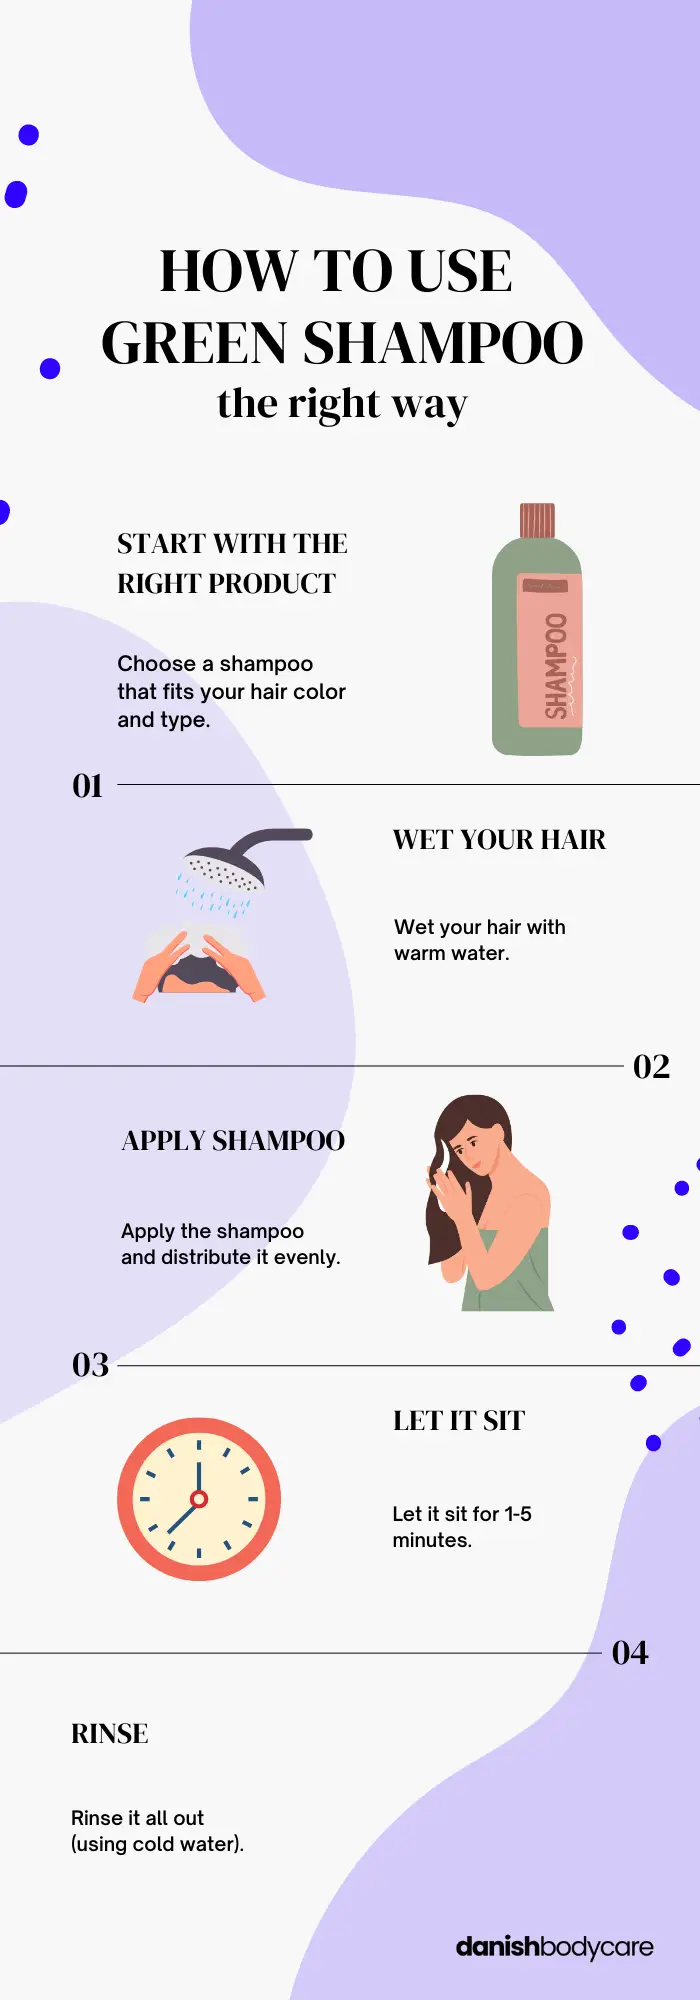 How to Use green shampo infographic